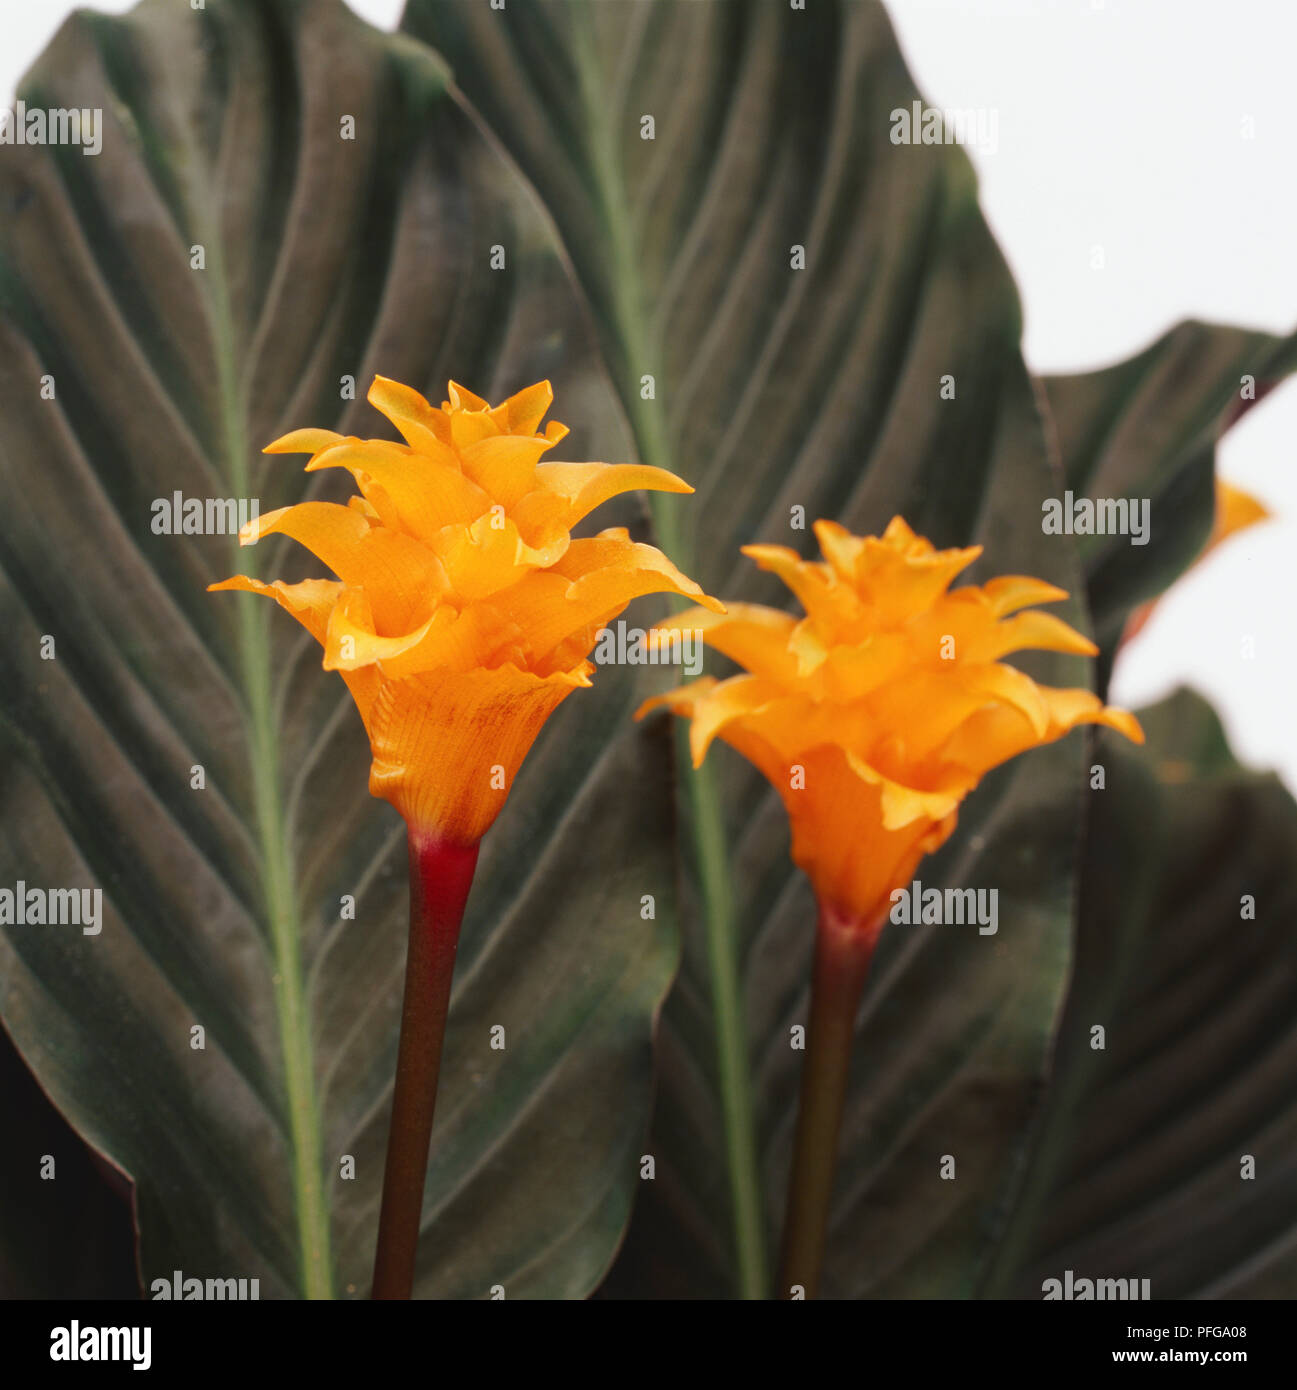 A bright yellow flame-like flower with dark red pedicels on a Calathea crocata plant. Flowerhead with orange bracts. Stock Photo